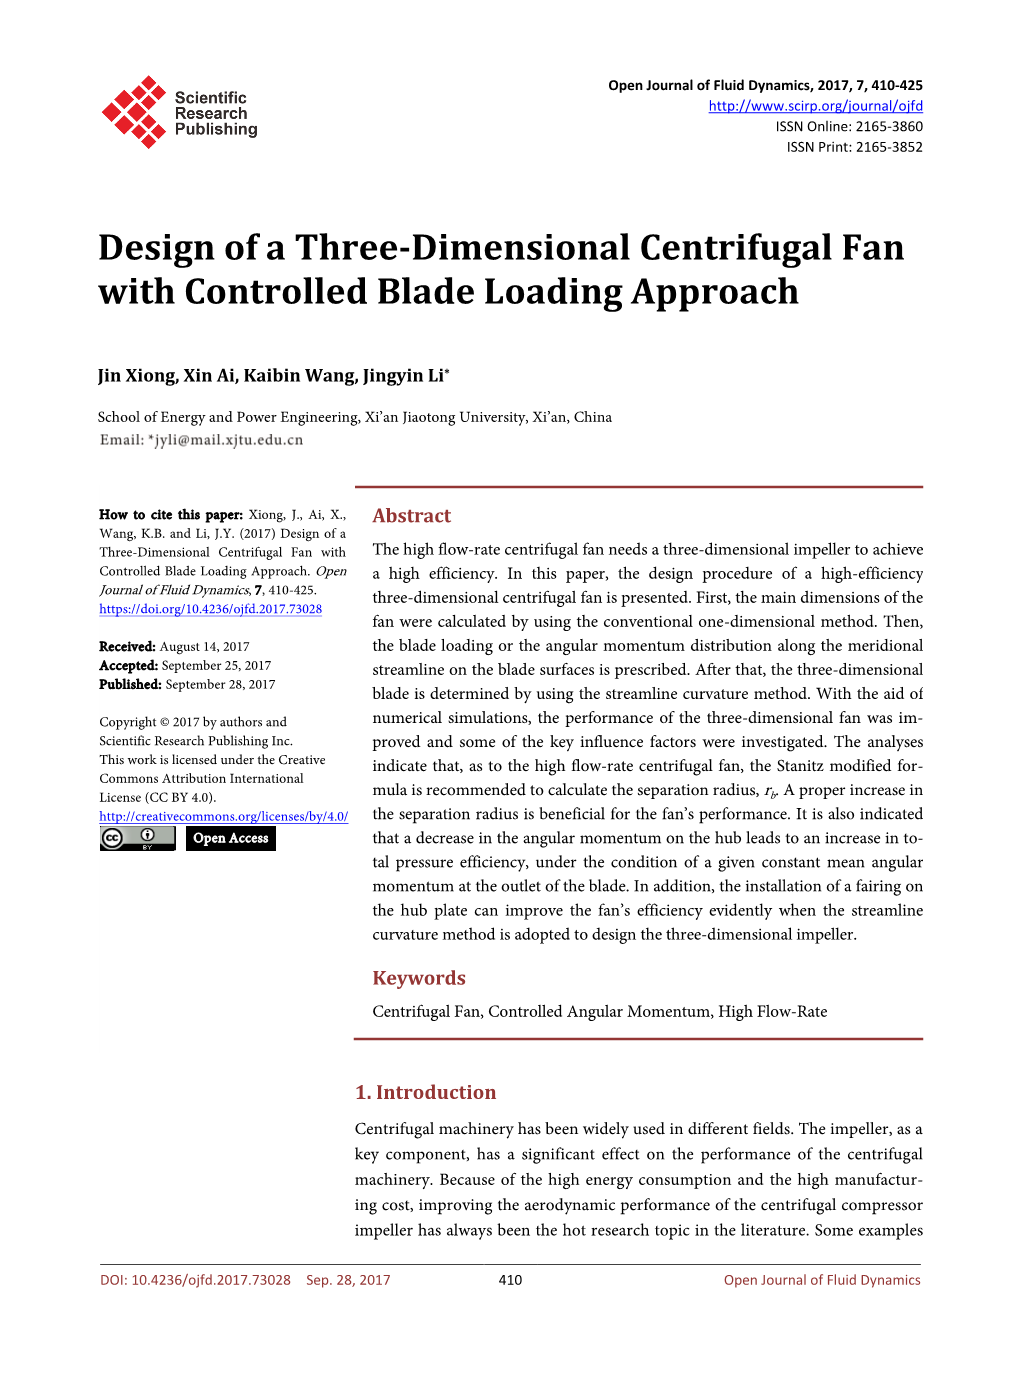 Design of a Three-Dimensional Centrifugal Fan with Controlled Blade ...